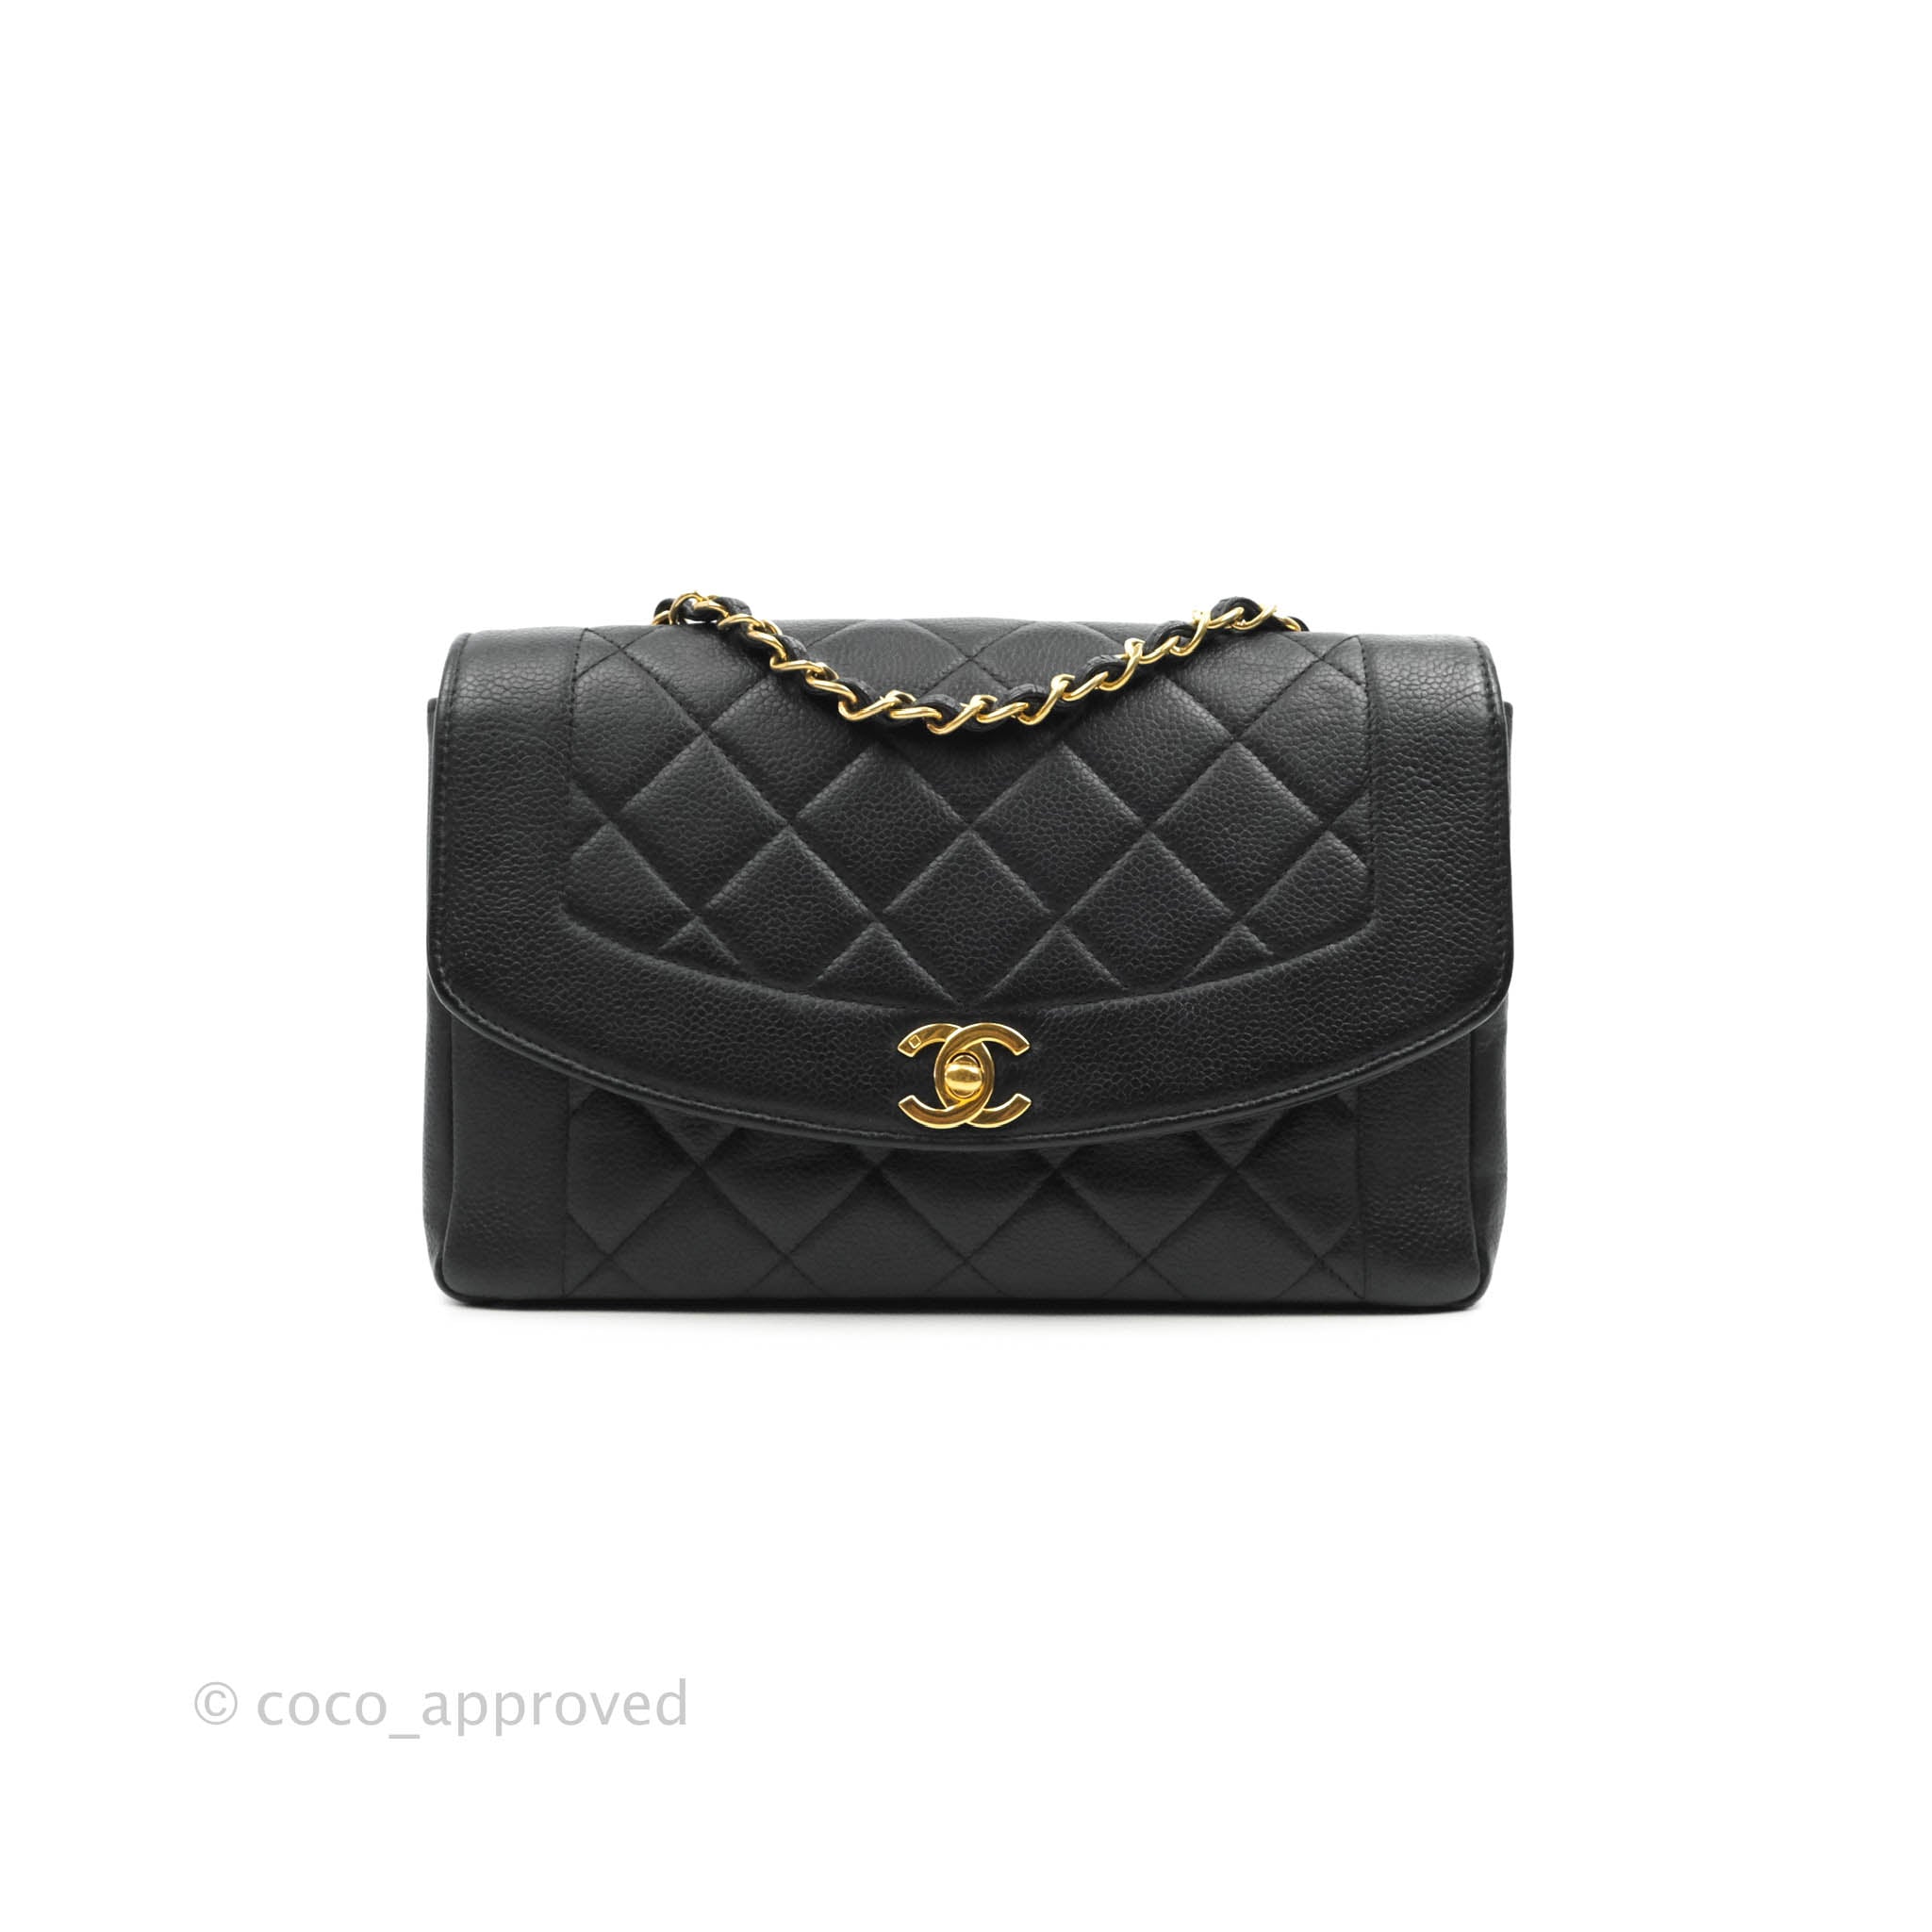 1994-1996 CHANEL Vintage Small Diana – Adore Adored